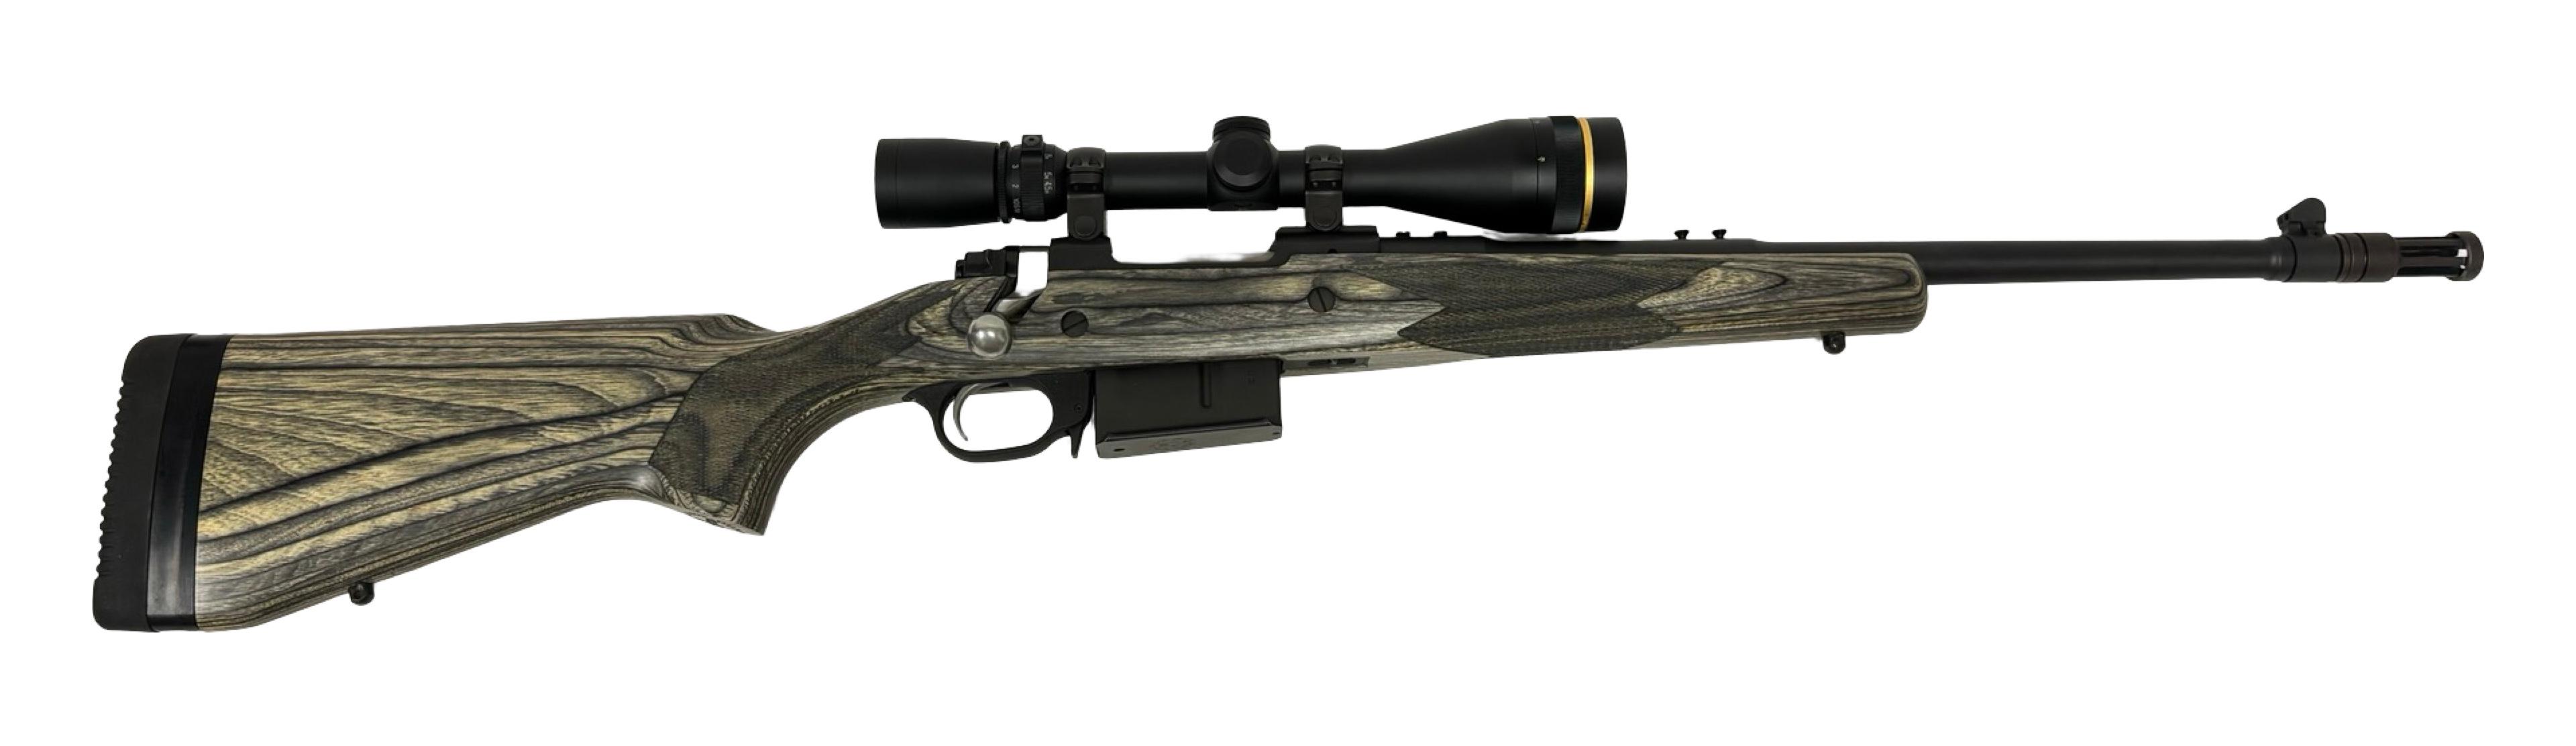 New Ruger Gunsite Scout .308 WIN. Compact Lightweight Hunting Rifle with Leupold Scope